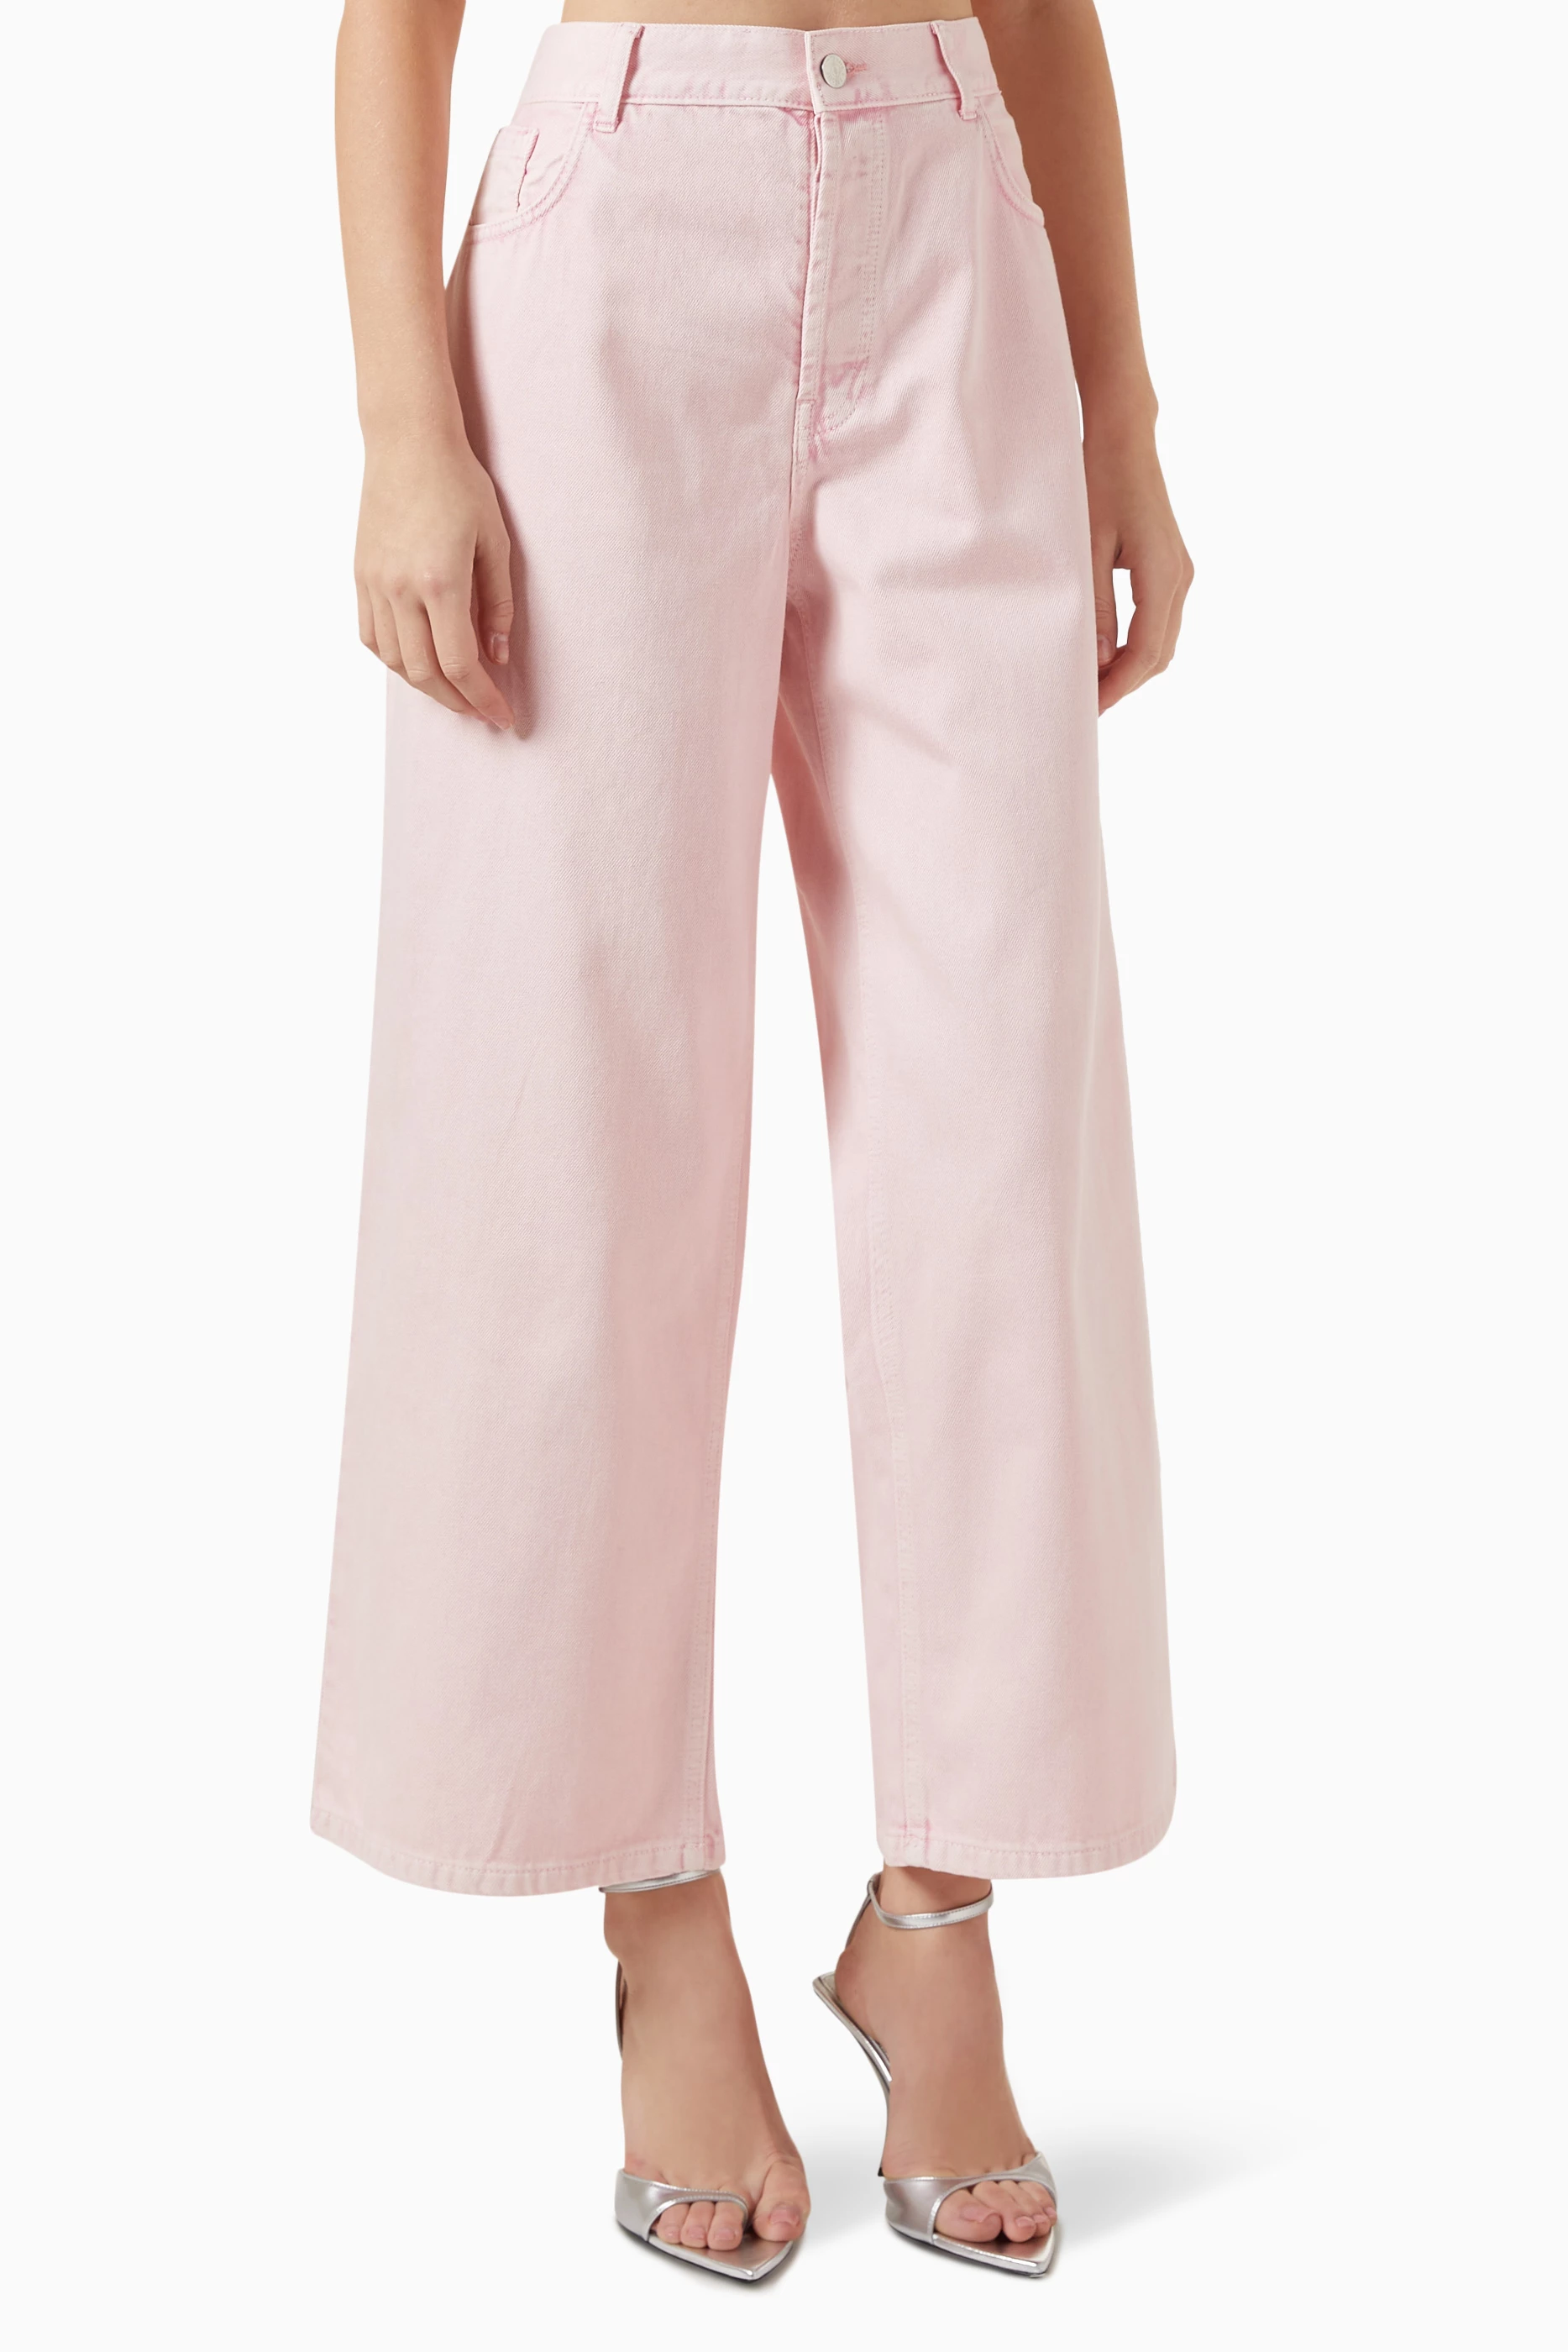 BABY PINK DOUBLE-WAISTED PANTS – CEKETTE